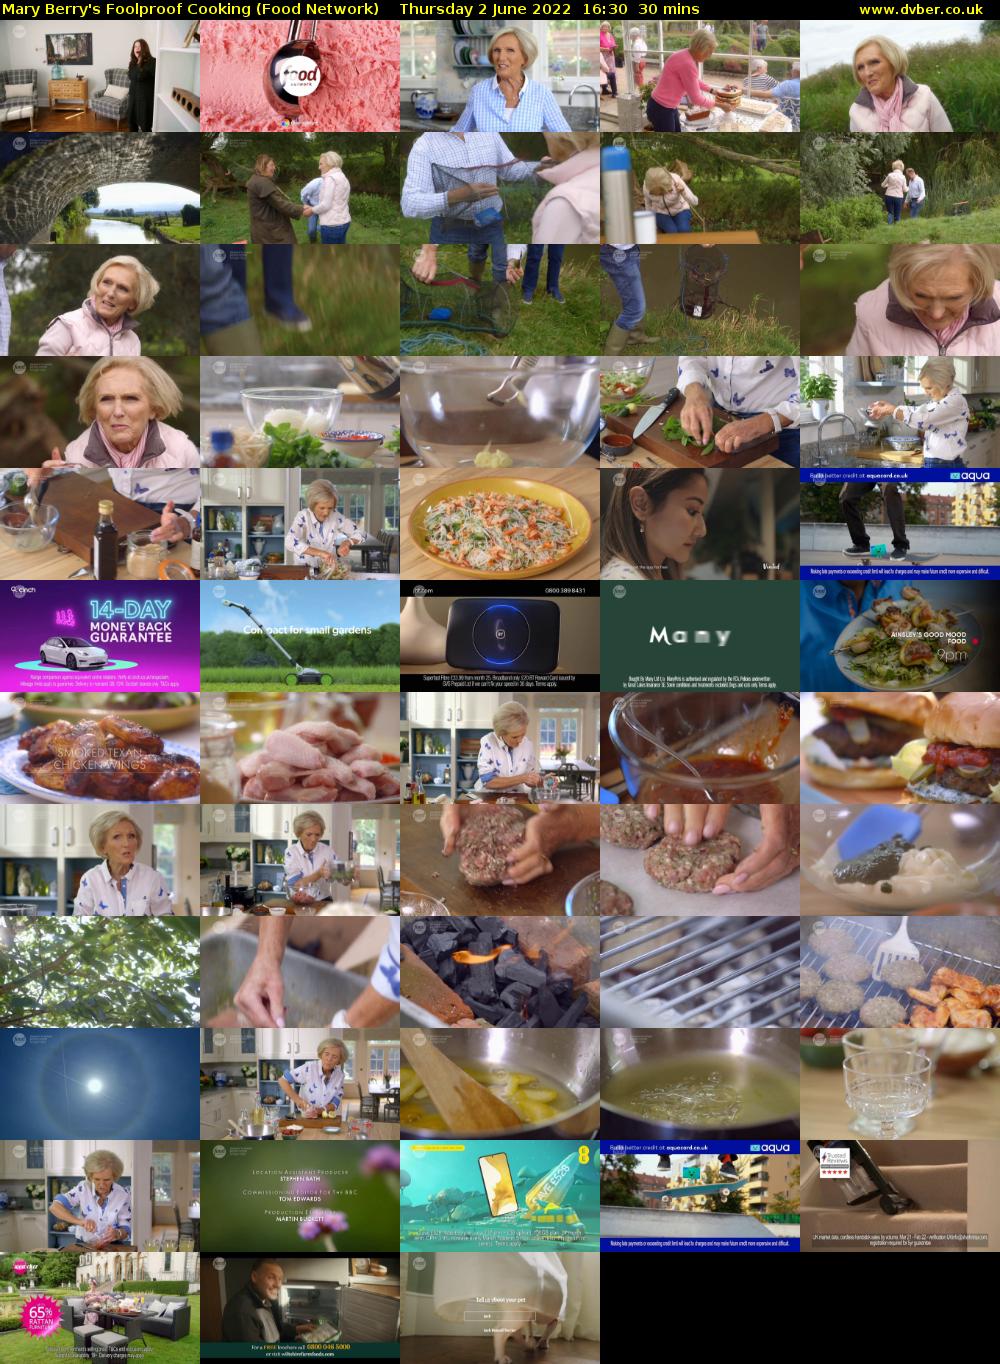 Mary Berry's Foolproof Cooking (Food Network) Thursday 2 June 2022 16:30 - 17:00